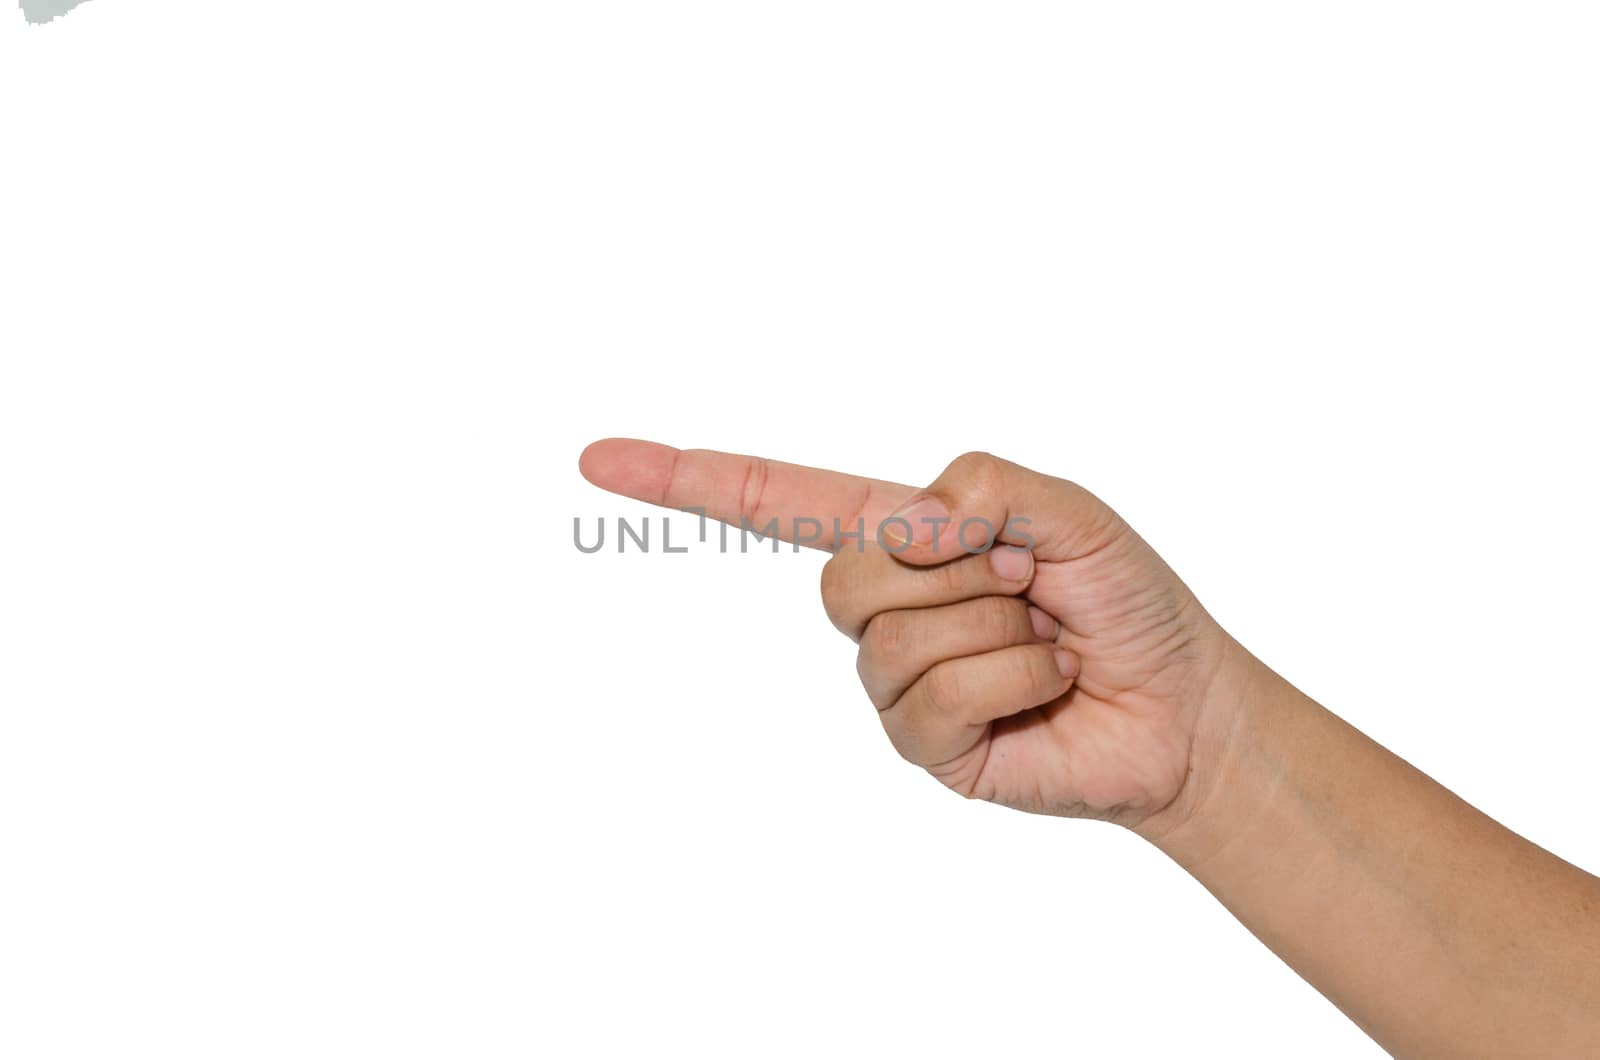 hand point with finger isolated on white.